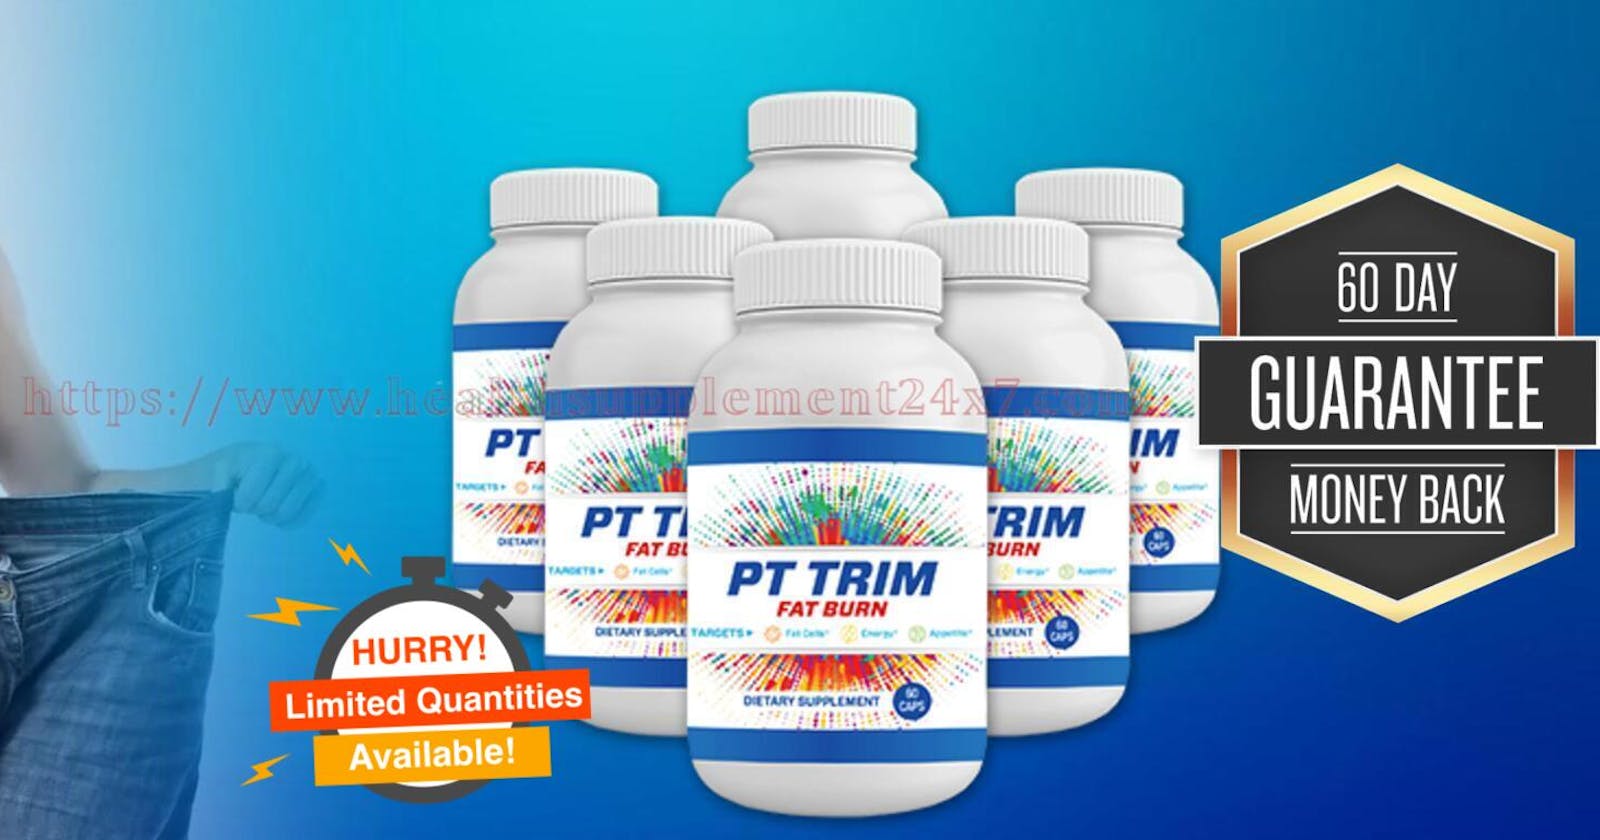 PT Trim Fat Burn {Clinically Proven} Reduce Appetite & Cravings Helpful For Weight And Fat Loss(REAL OR HOAX)